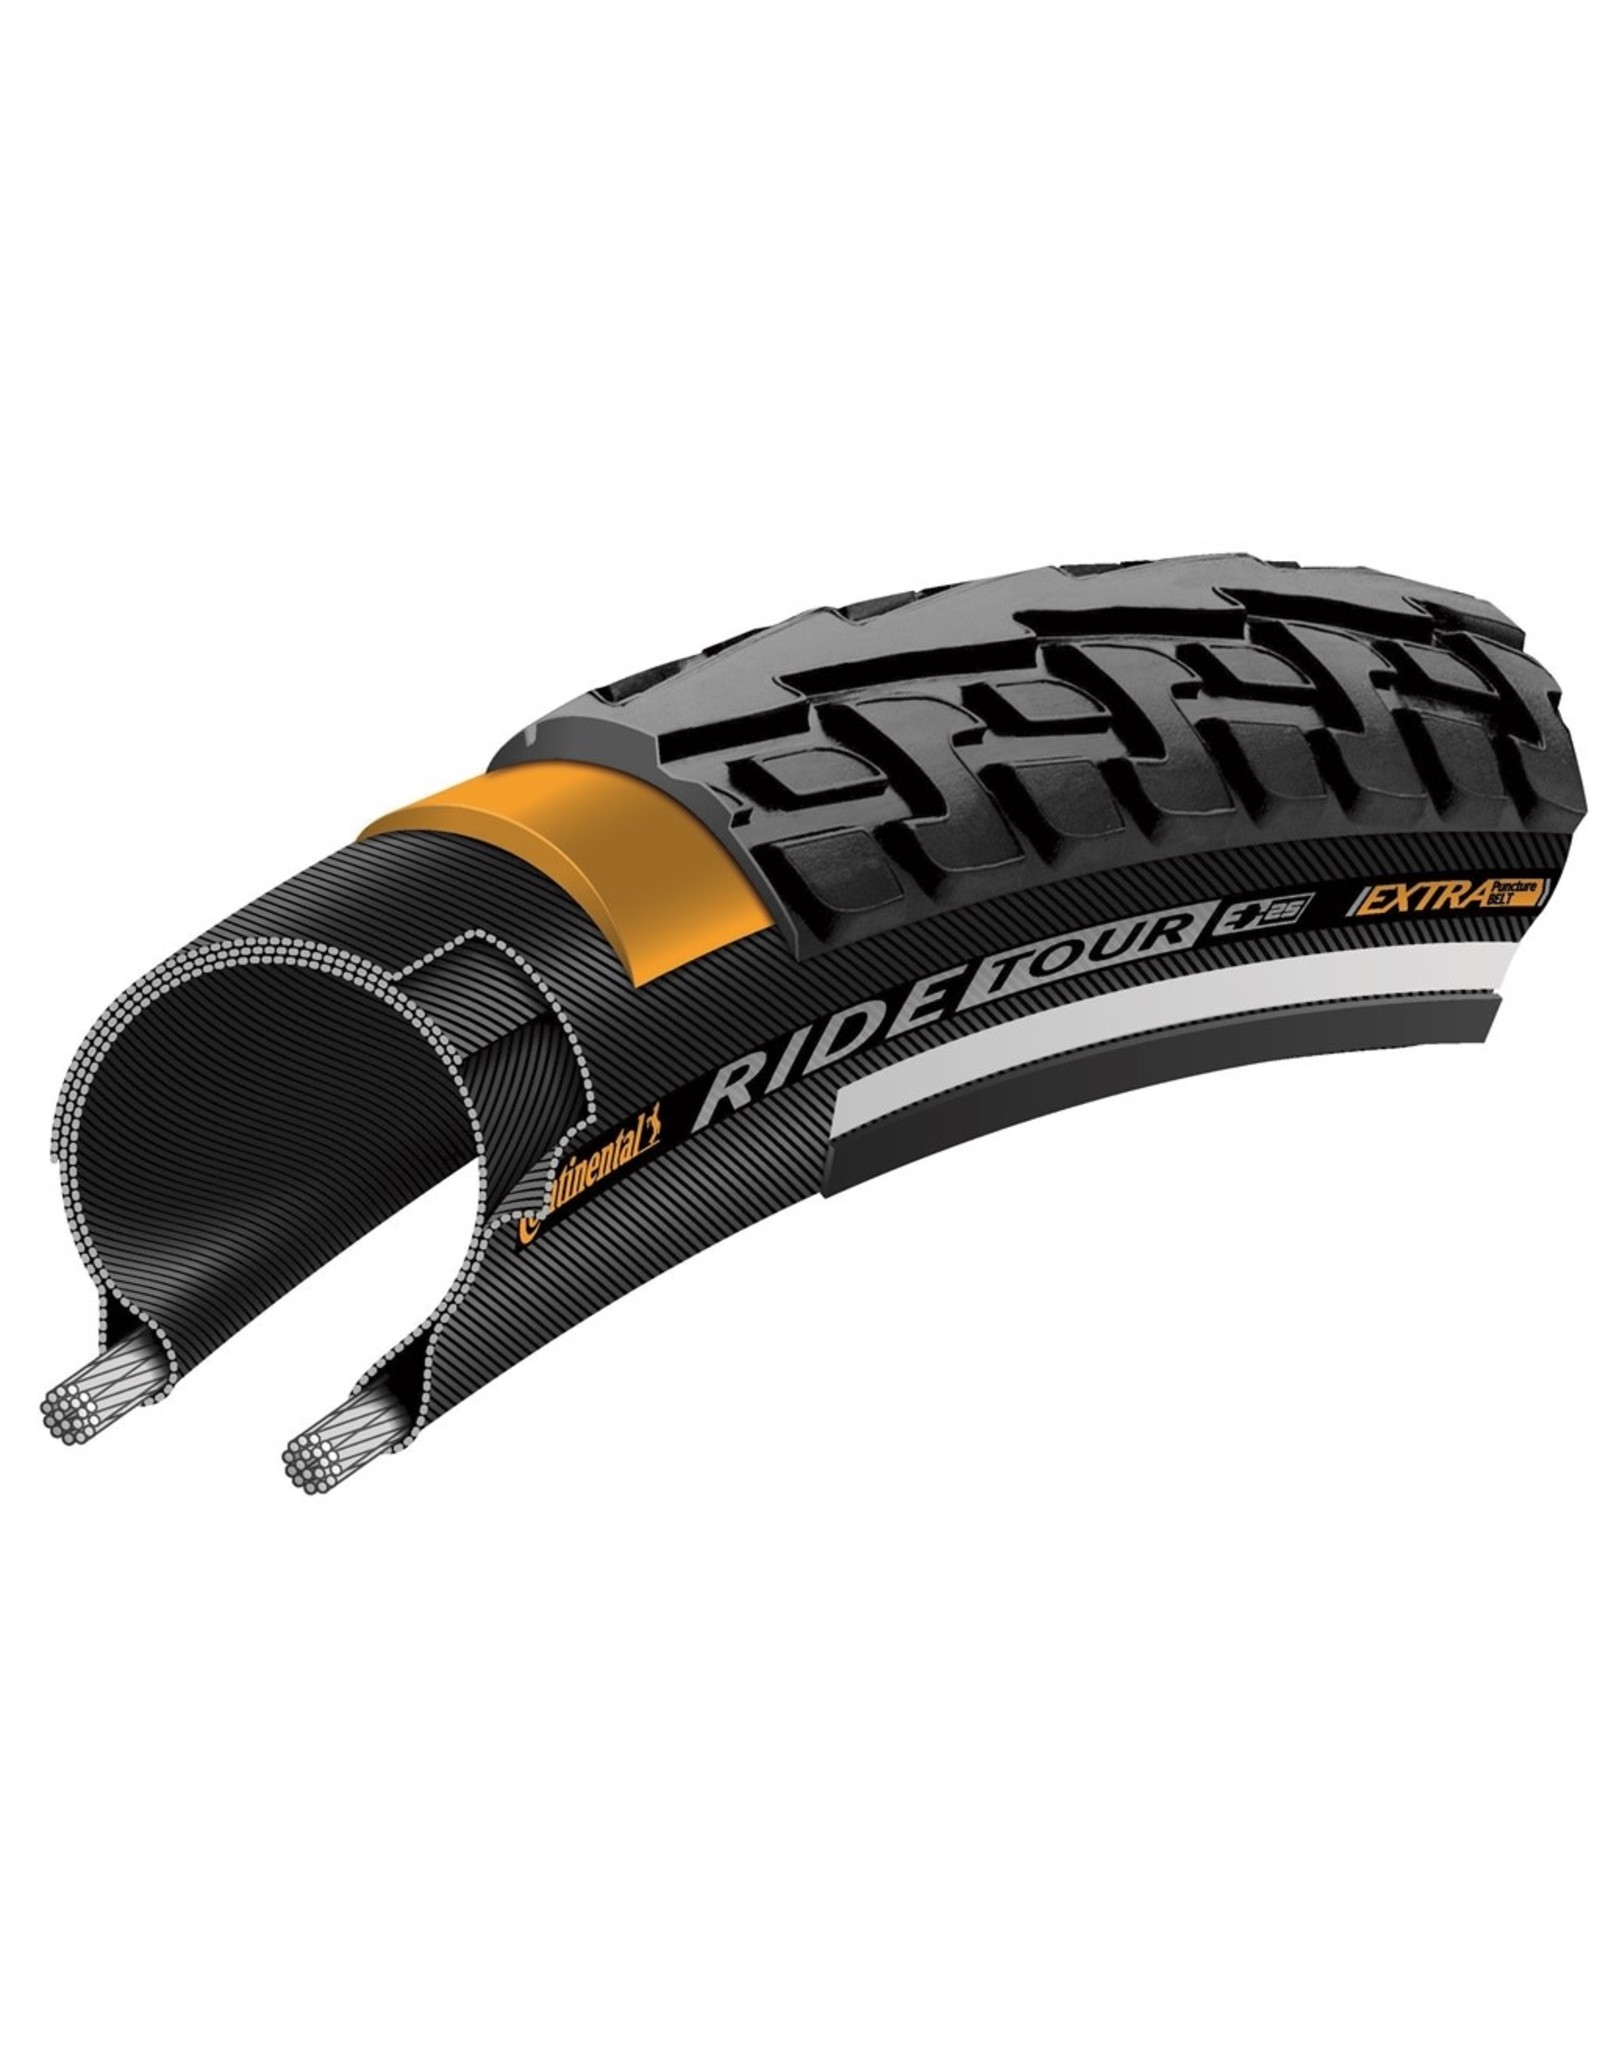 Continental Continental Ride Tour Tire 700c